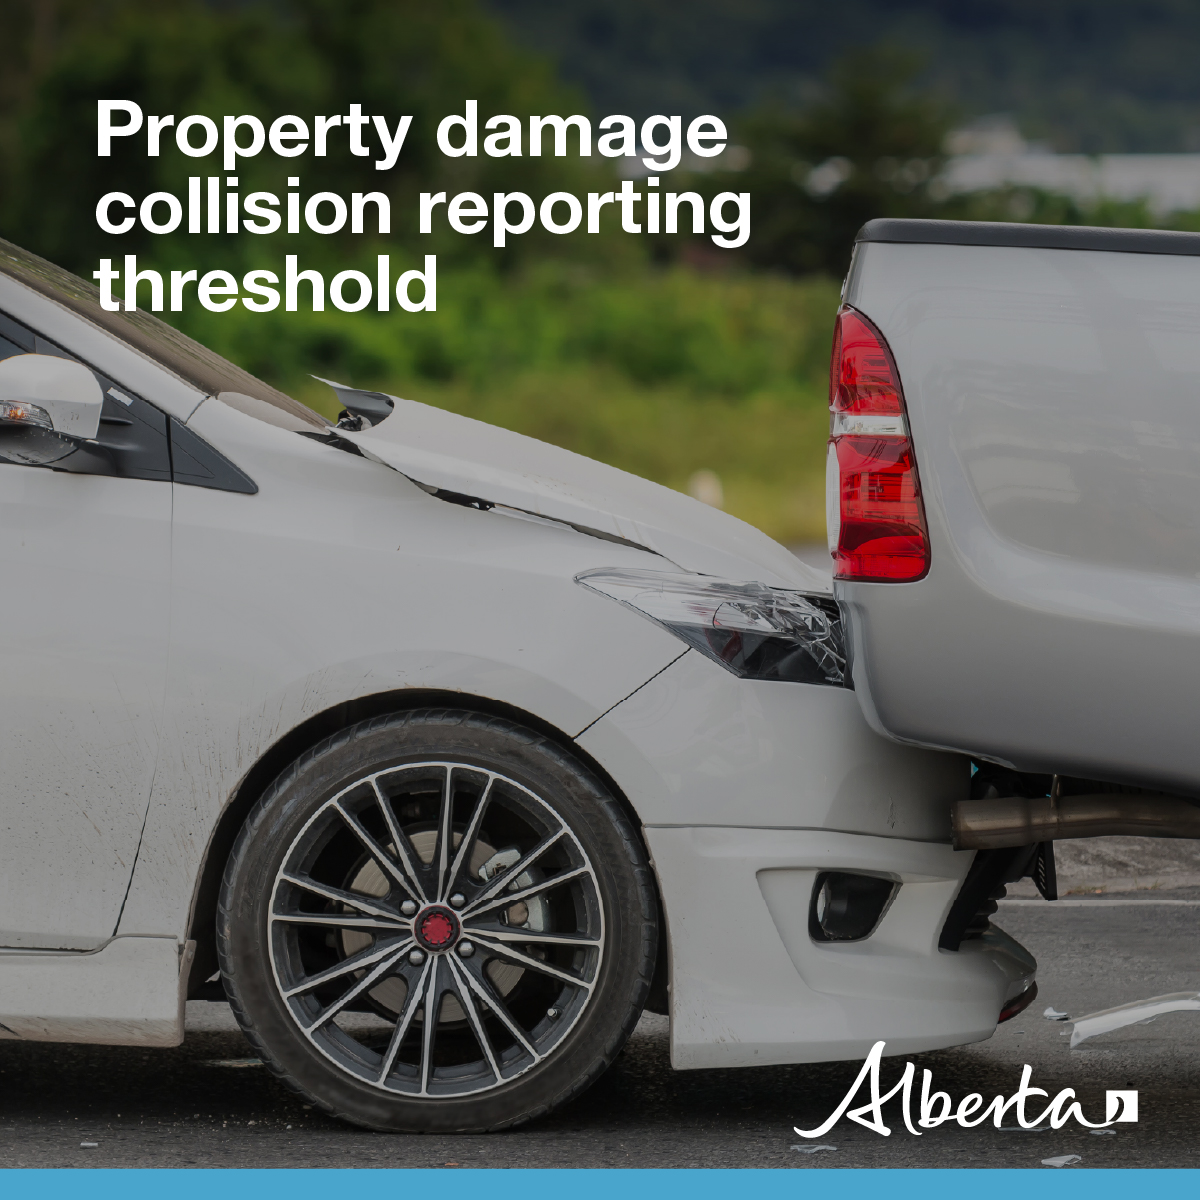 Drivers no longer have to report property damage from a collision to law enforcement unless the cost is more than $5,000. This increase from the previous threshold of $2,000 better reflects current vehicle repair costs. Learn more: alberta.ca/release.cfm?xI…